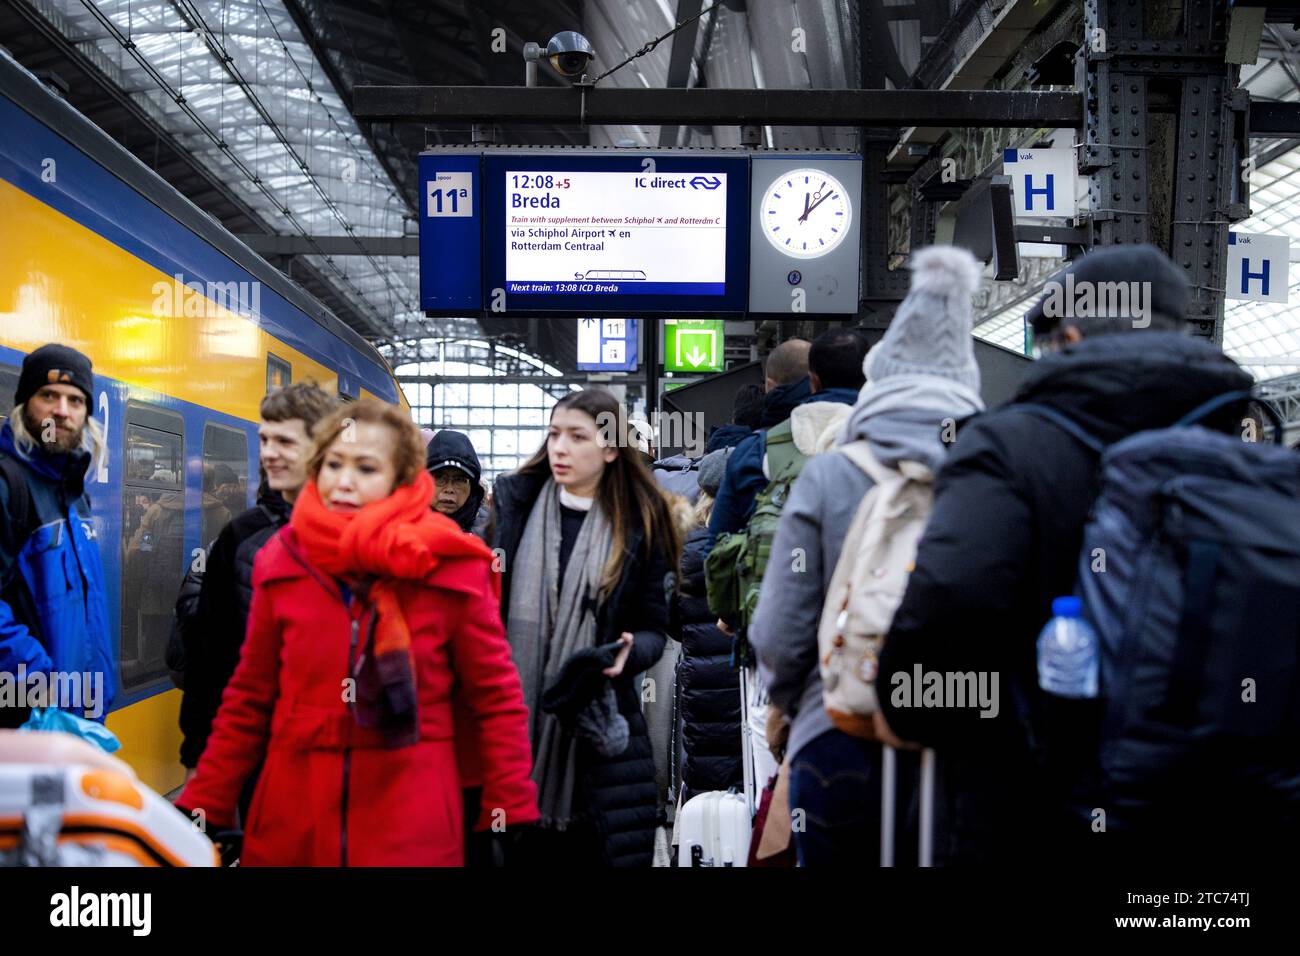 AMSTERDAM - Travelers at Amsterdam Central station. The new NS timetable has come into effect. For example, more intercity trains run between the major cities and the Intercity Direct between Amsterdam and Breda runs all day long. ANP RAMON VAN FLYMEN netherlands out - belgium out Stock Photo